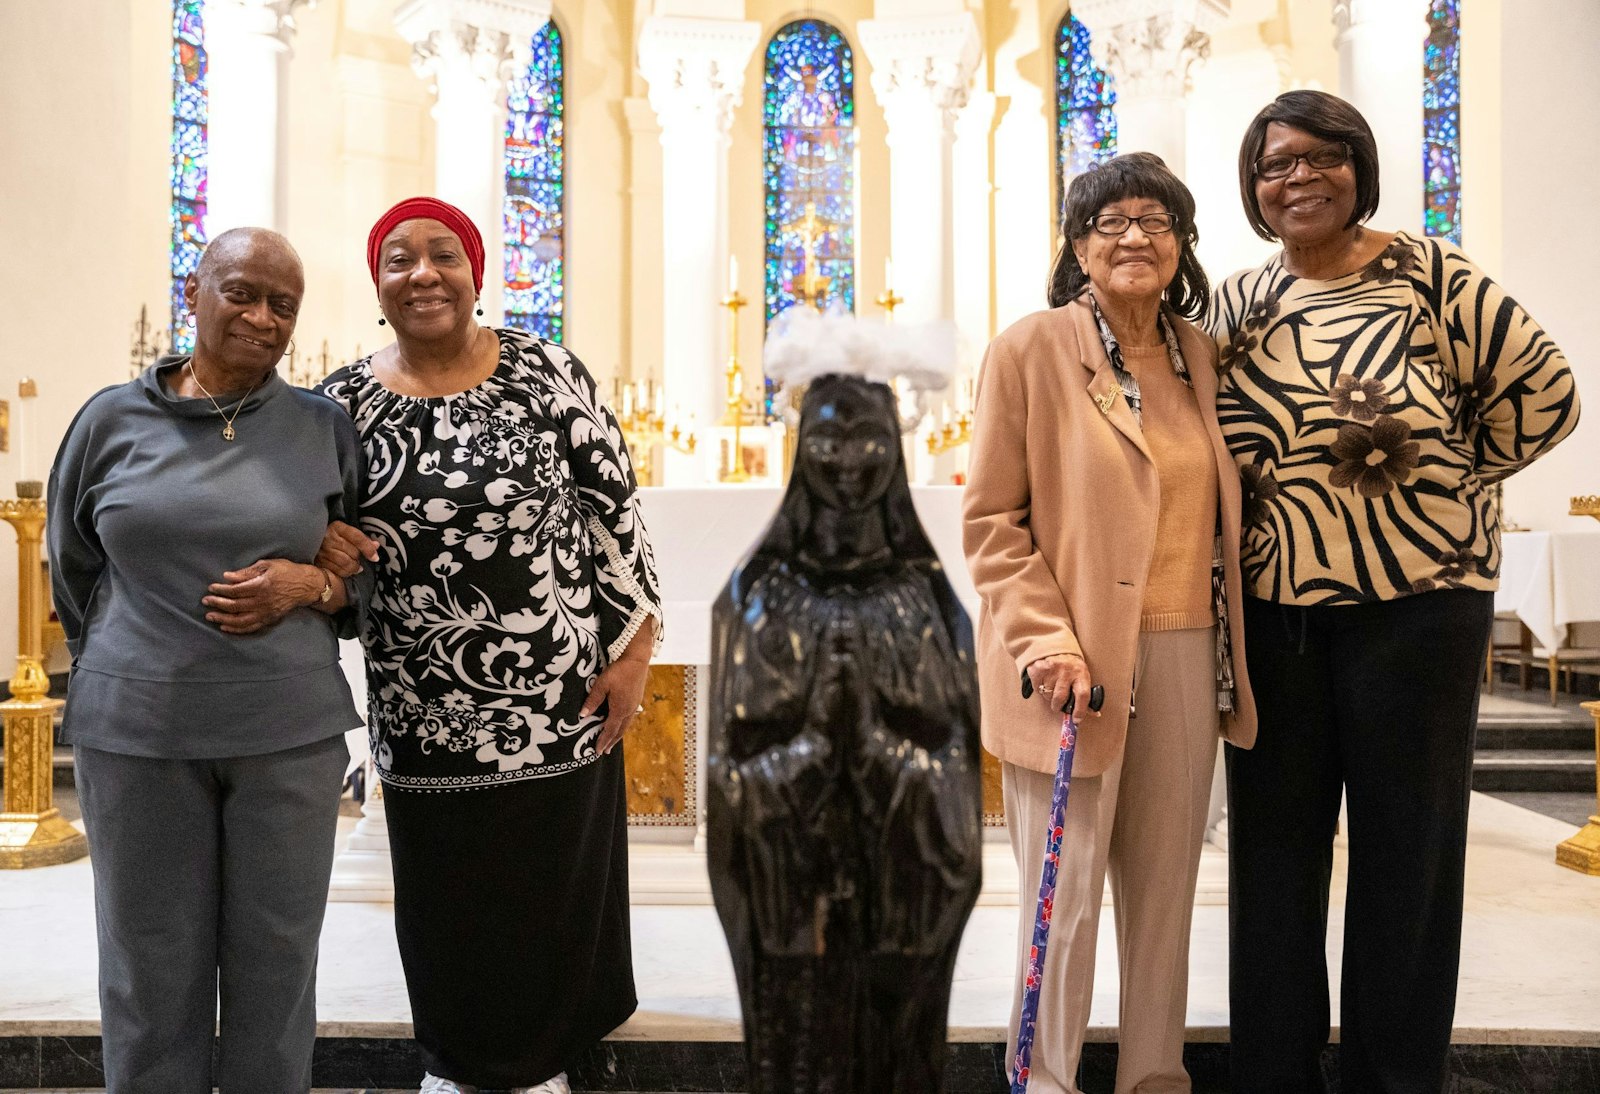 Vivian King, Rene' Bascombe, Alta Sears and Angela Thomas-Weldon are part of the St. Charles Lwanga 100th Anniversary Committee, planning the three-day celebration of the parish and the work it does in the neighborhood.